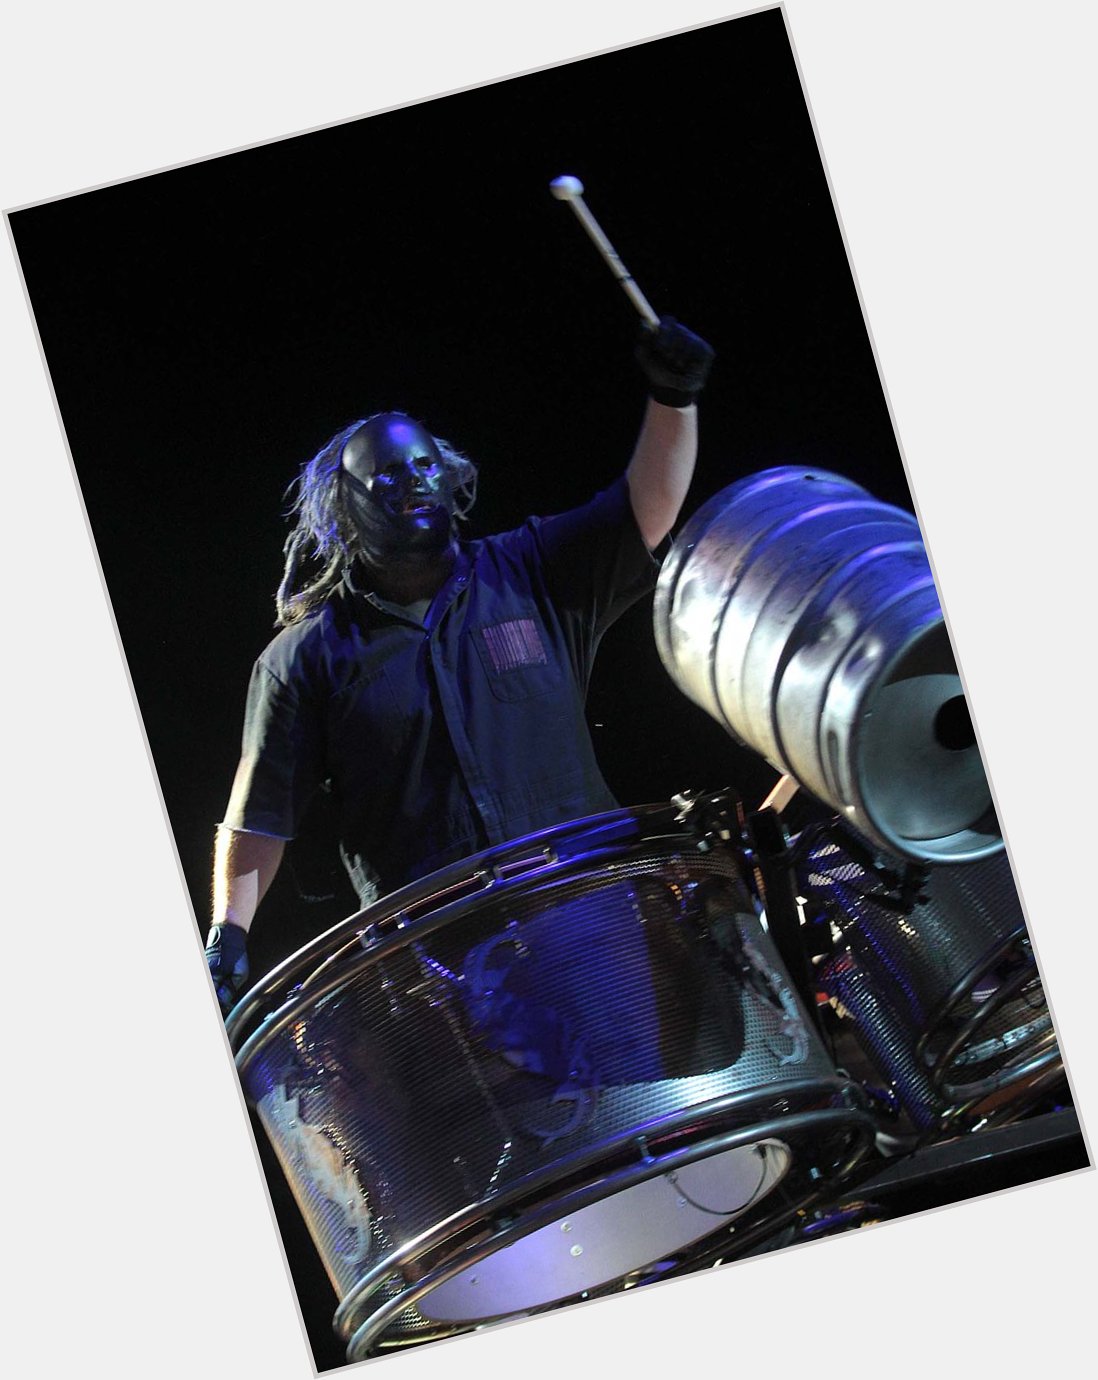 Happy Birthday Joey Jordison!   has rocked 3 times!  by Jim Hill from 2015 tour 